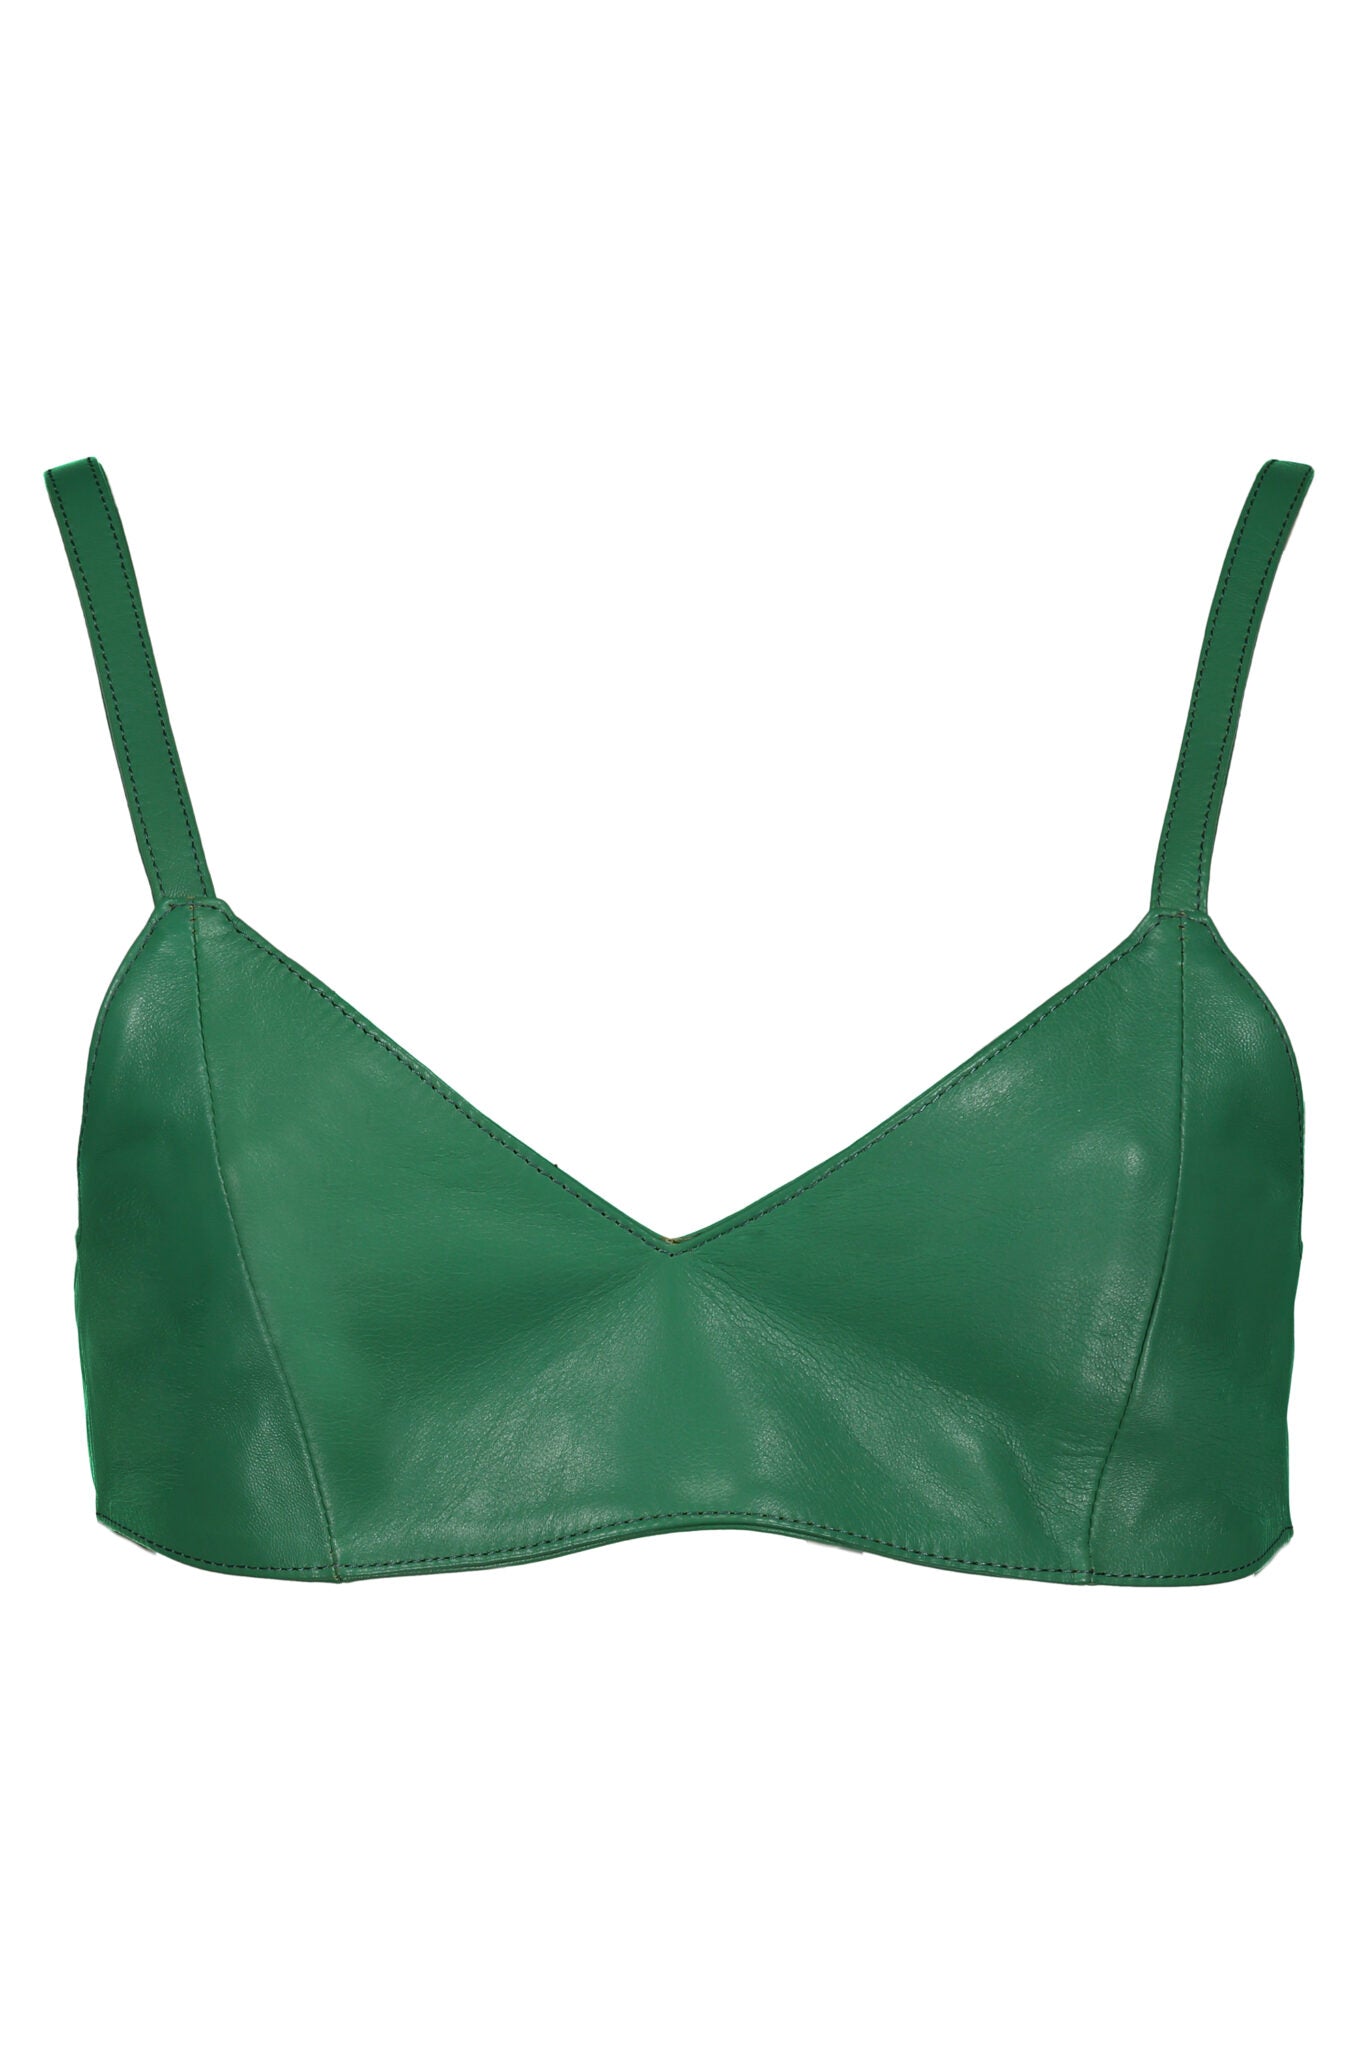 Bea Leather Green Top